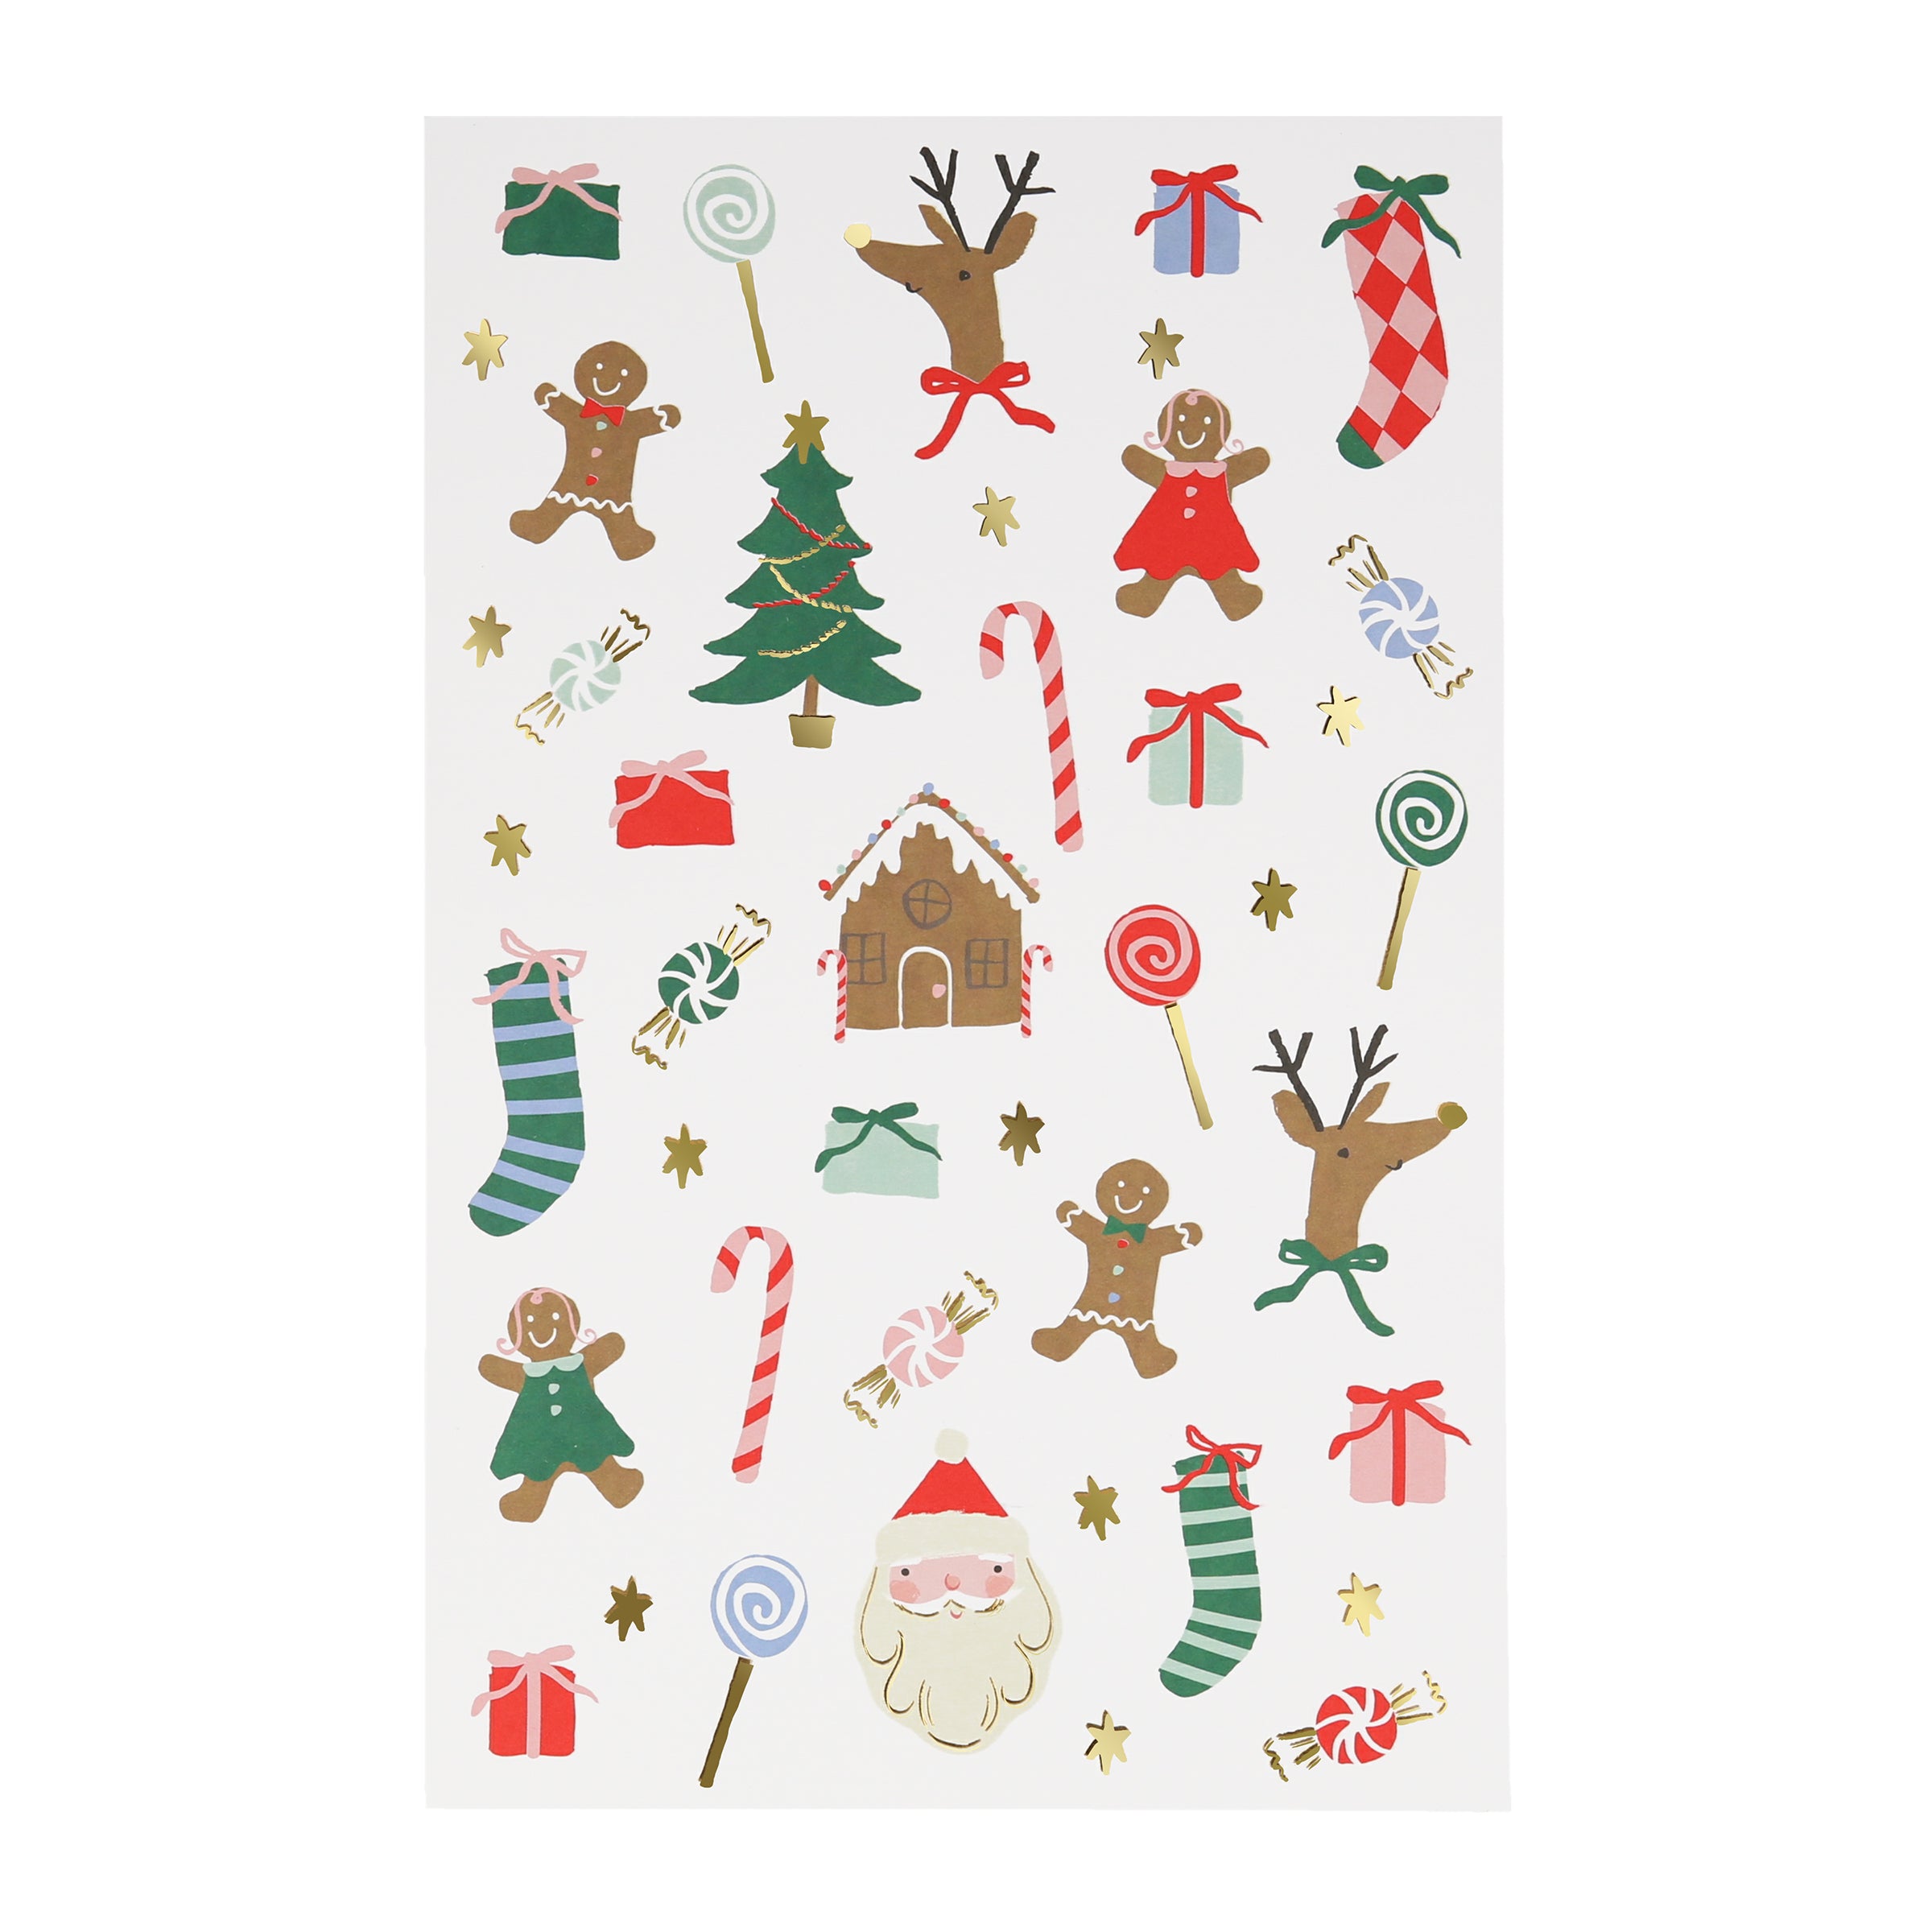 Create fun Christmas party activities with our tattoos for kids.